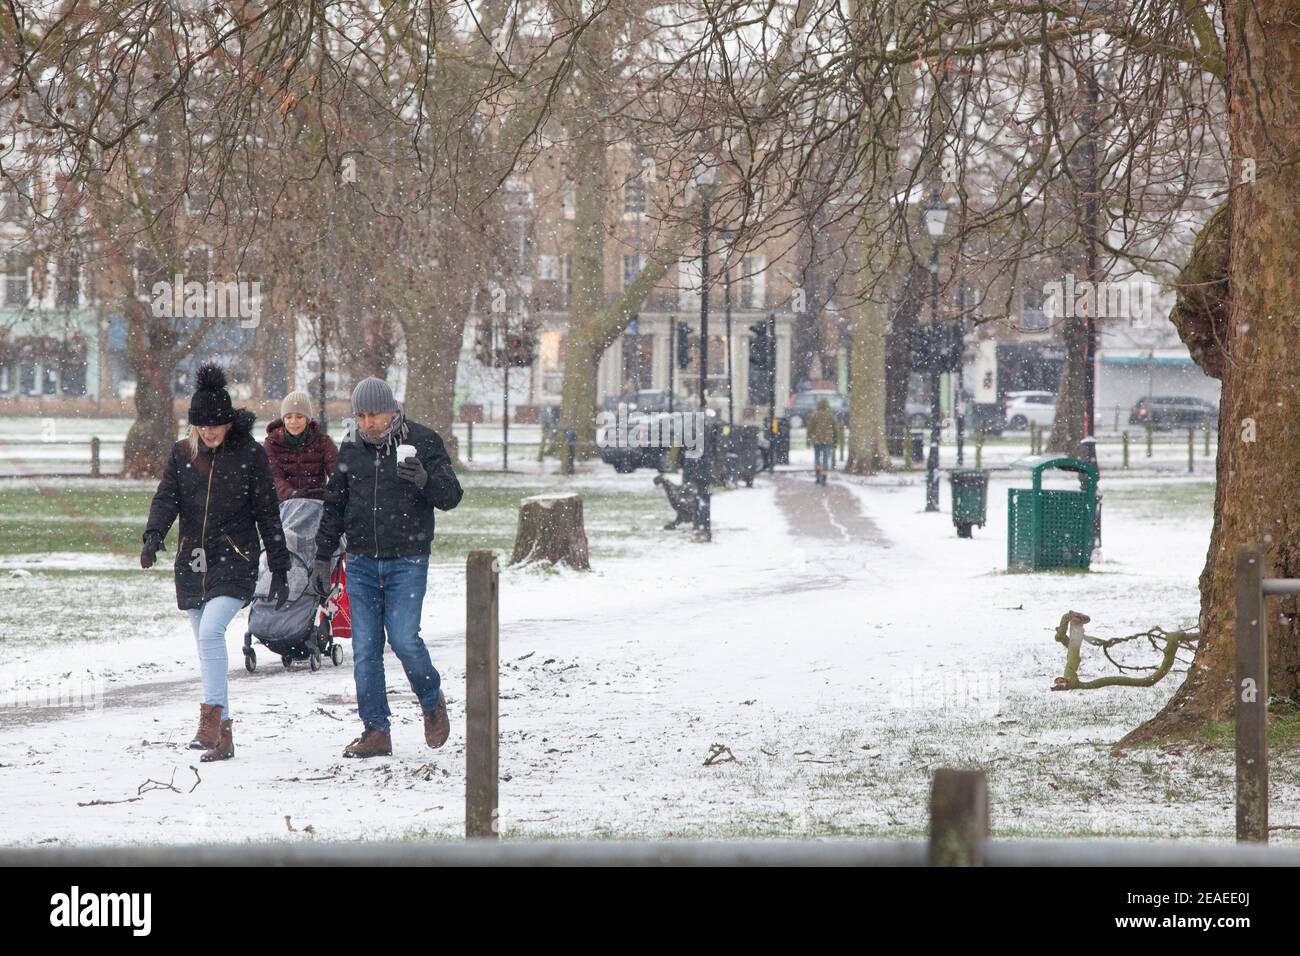 London, UK. 9 February 2021: After three days of snow in London it is starting to settle and winds have dropped as Storm Darcy has passed. On Clapham Common a few people take exercise. Credit: Anna Watson/Alamy Live News Stock Photo